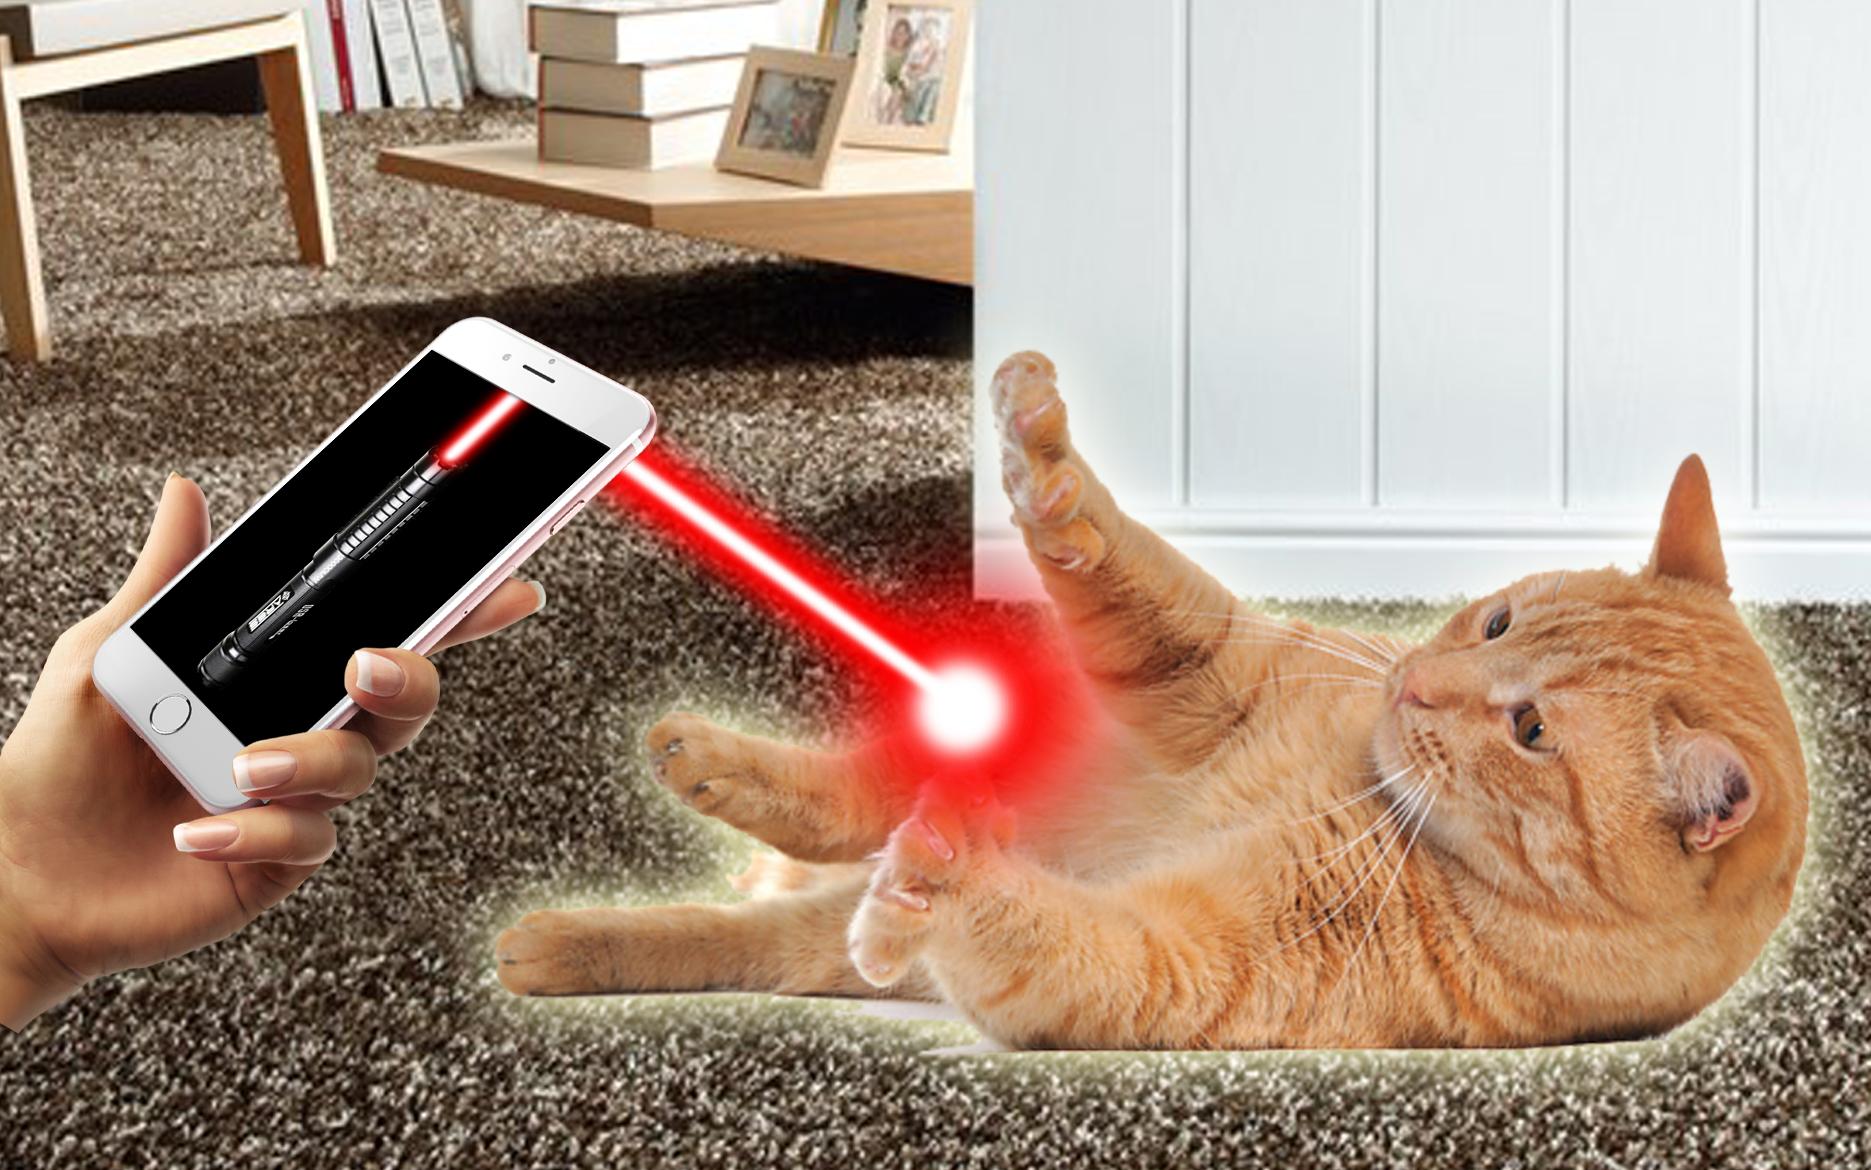 Laser for cat for Android - APK Download